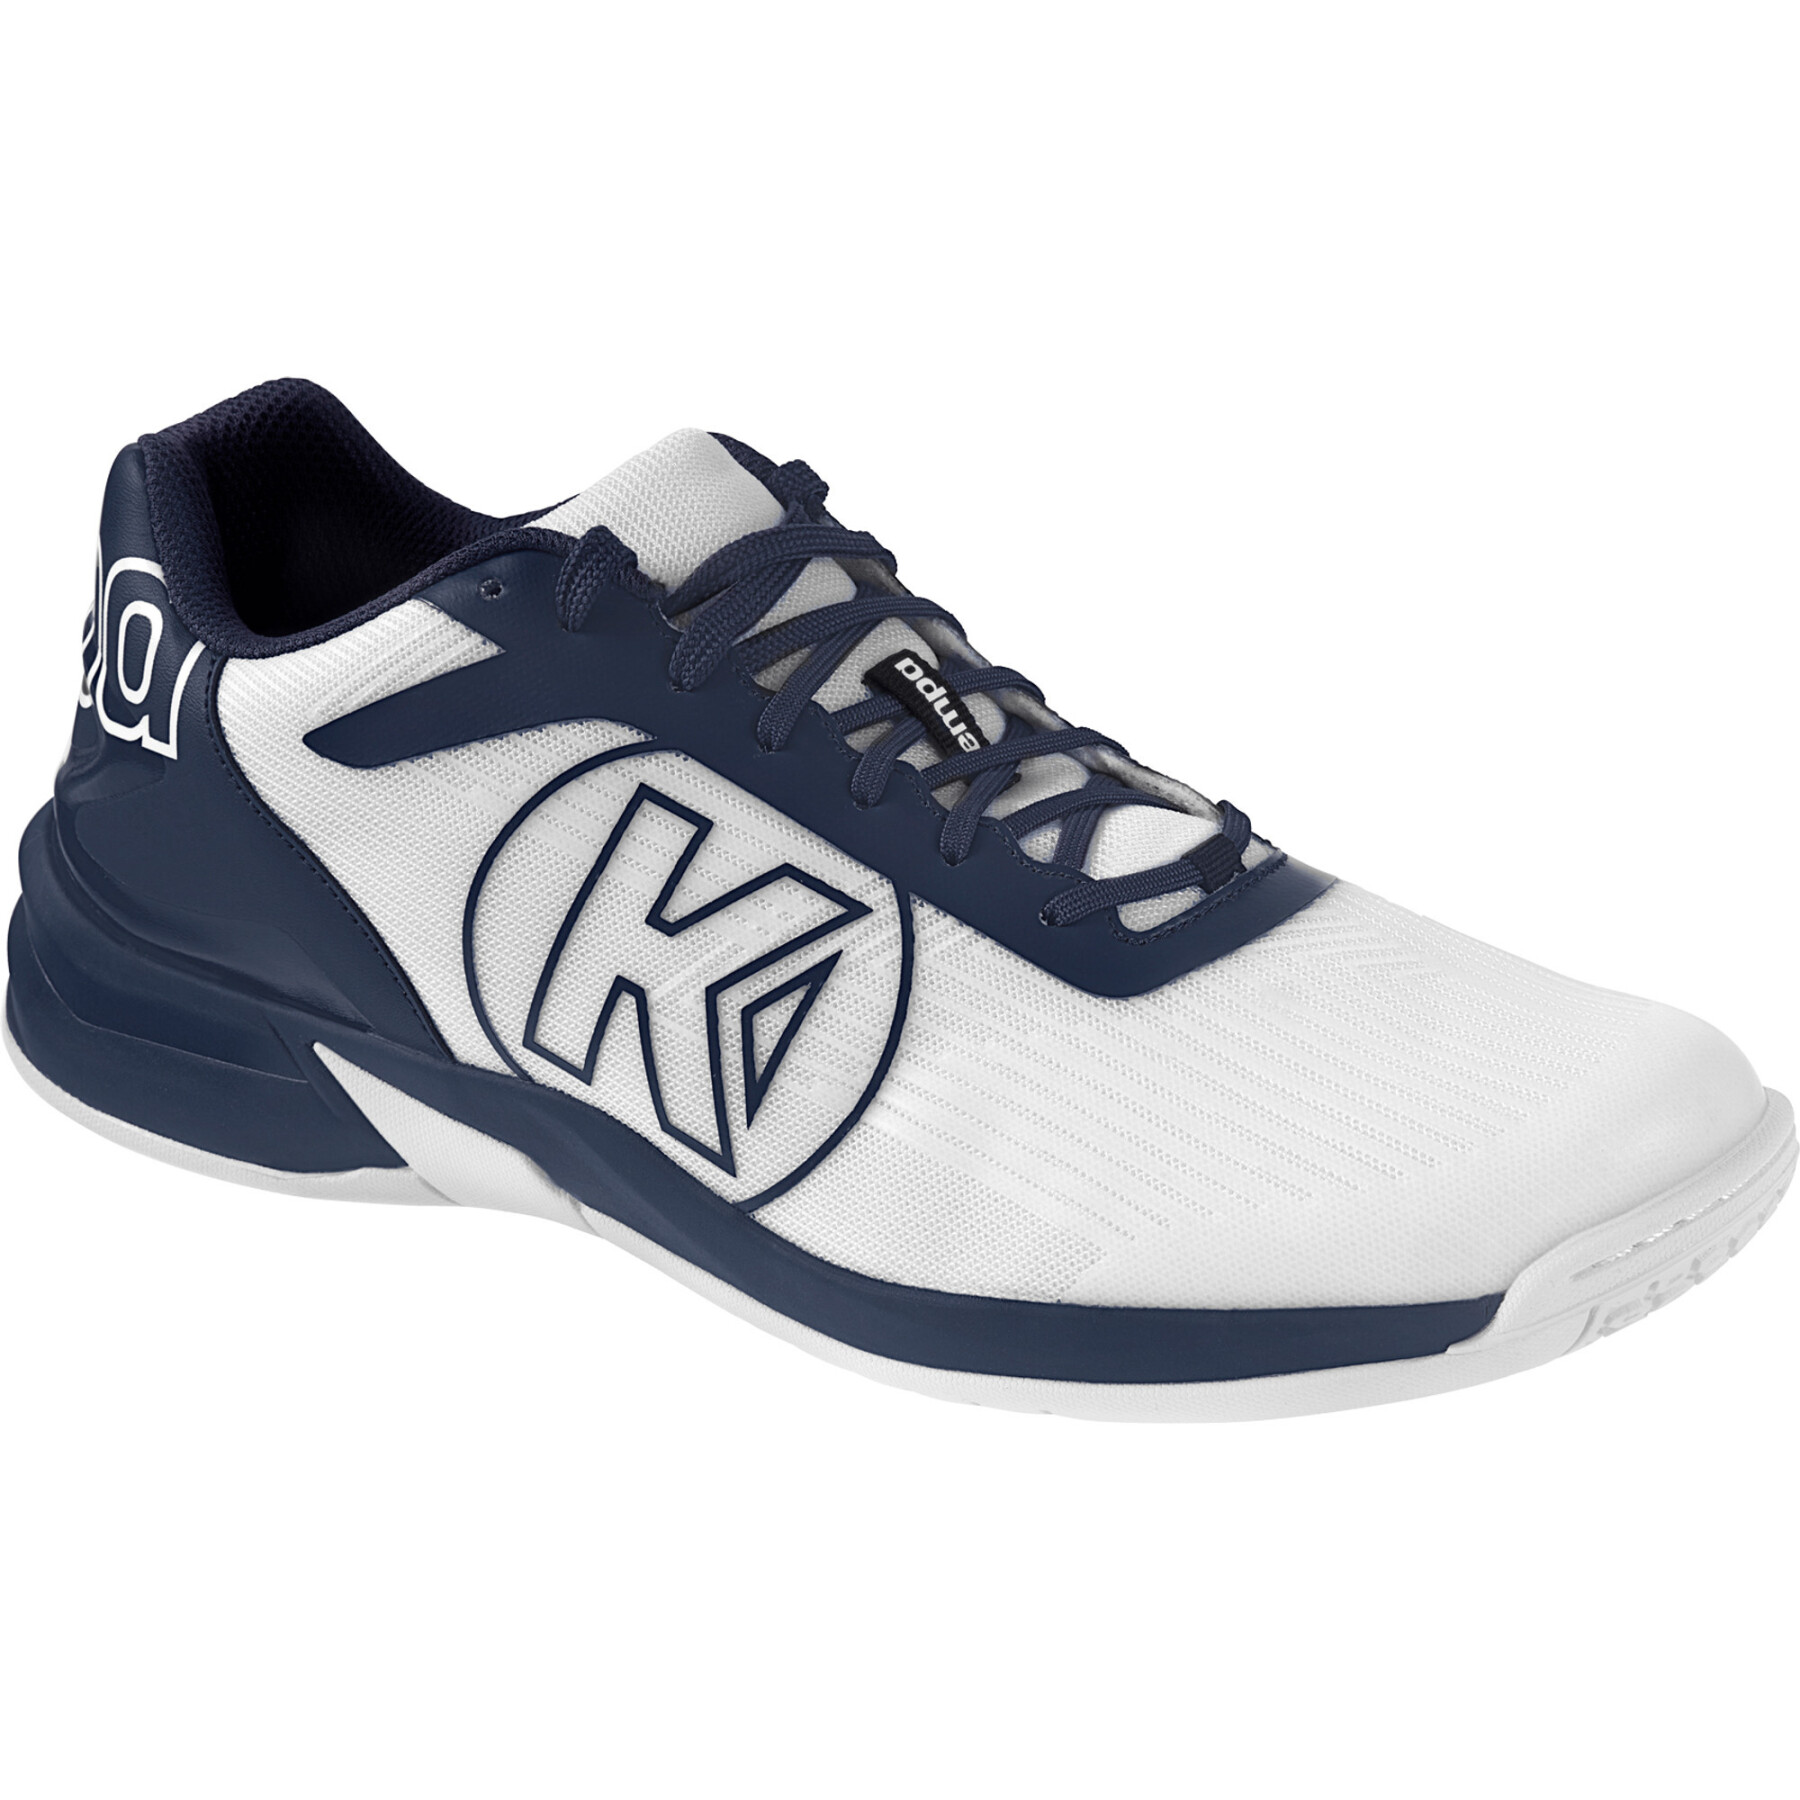 Indoor shoes Kempa Attack Three 2.0 Game Changer